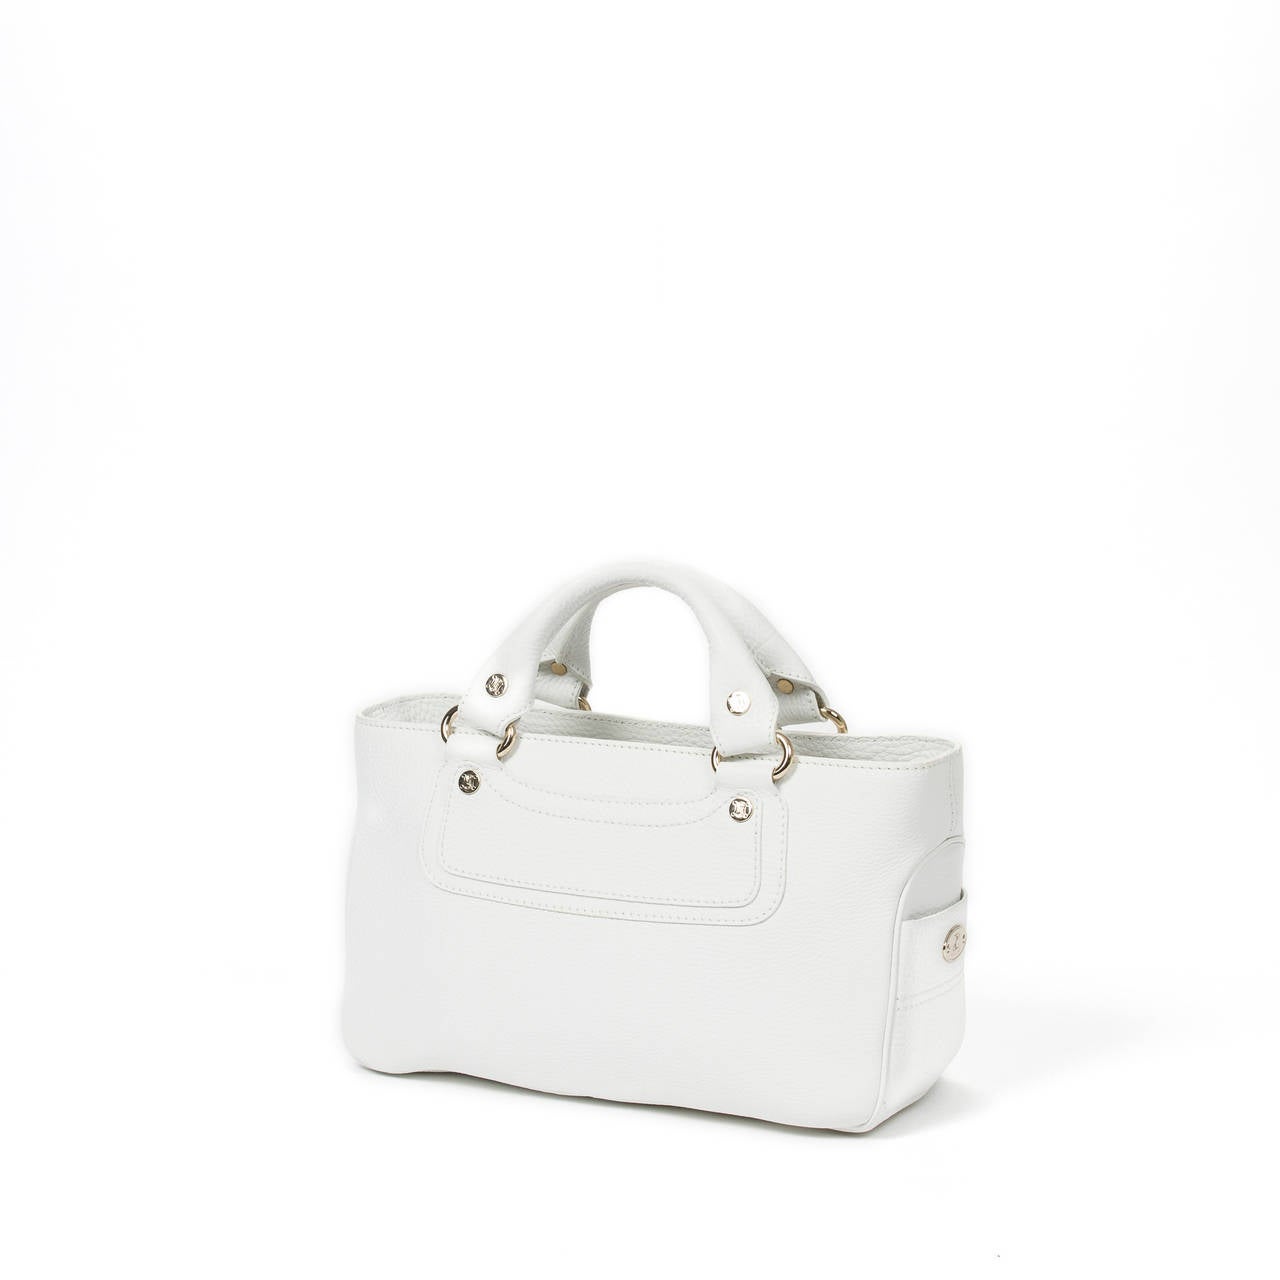 Celine Boogie Bag in white grained leather with gold tone hardware. Lined interior in white jacquard canvas with one zip and one slip pocket. Perfect condition.